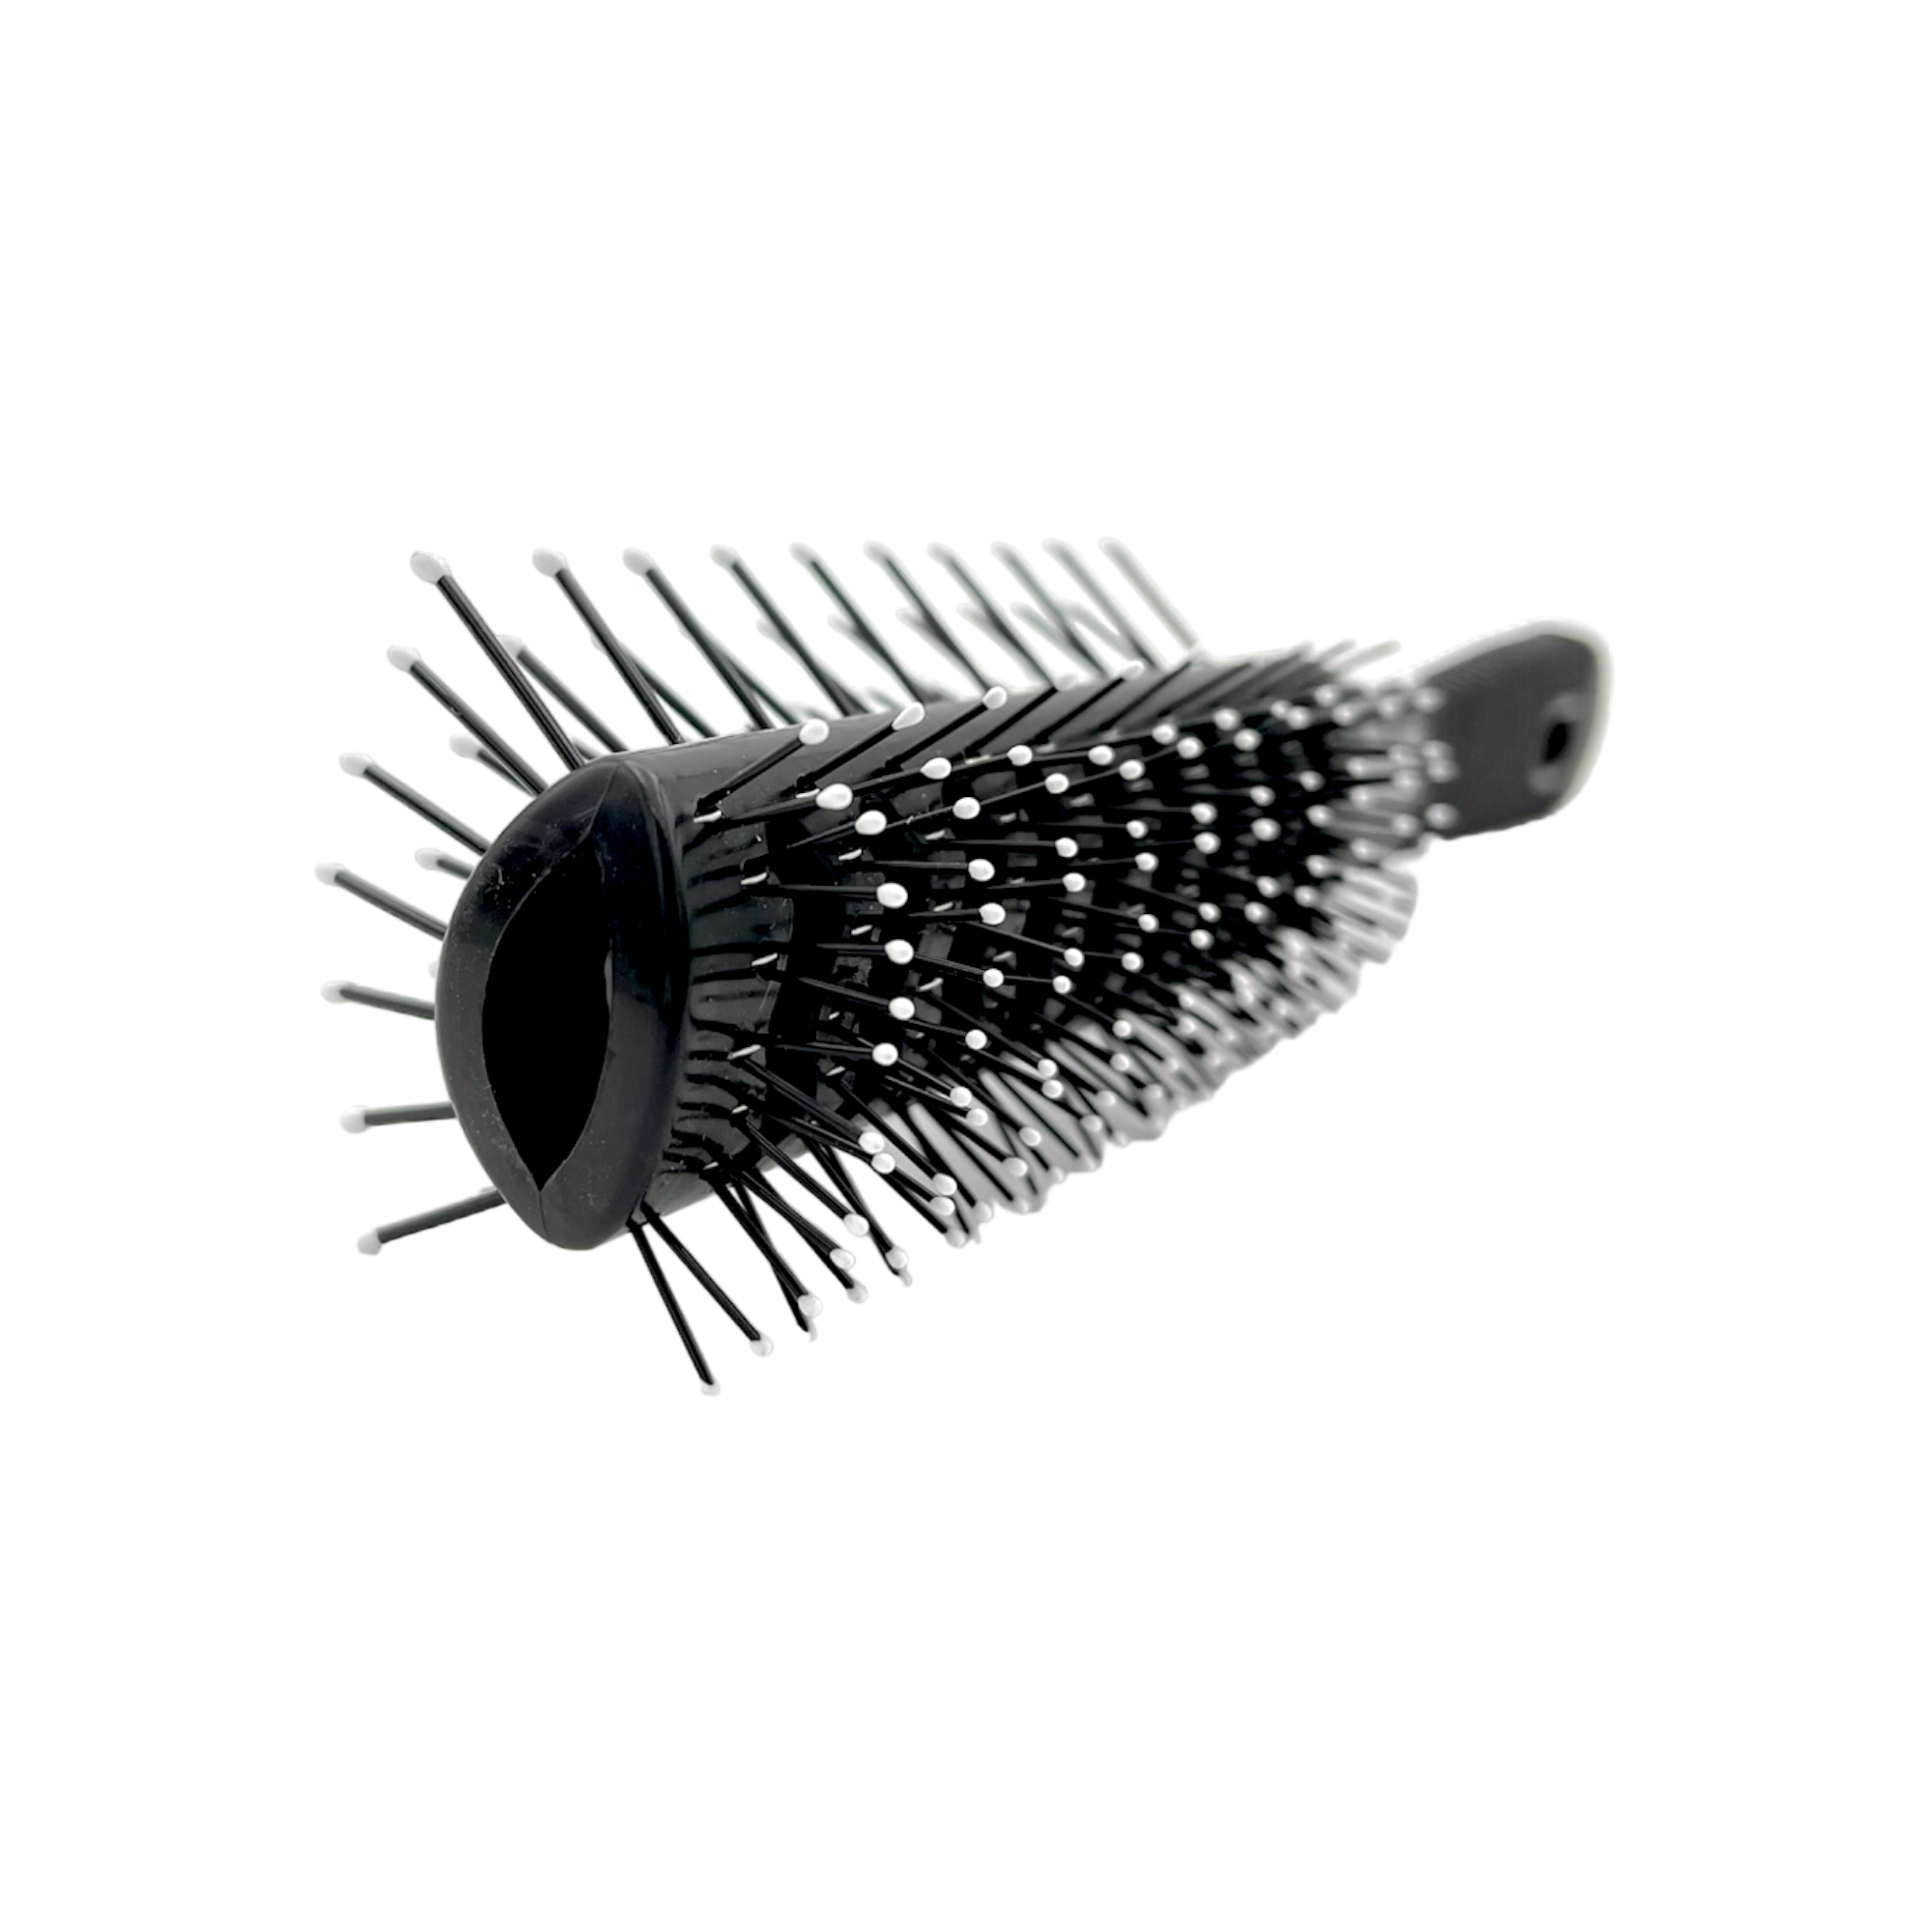 Dural Tunnel brush with plastic nylon pins and ball tips